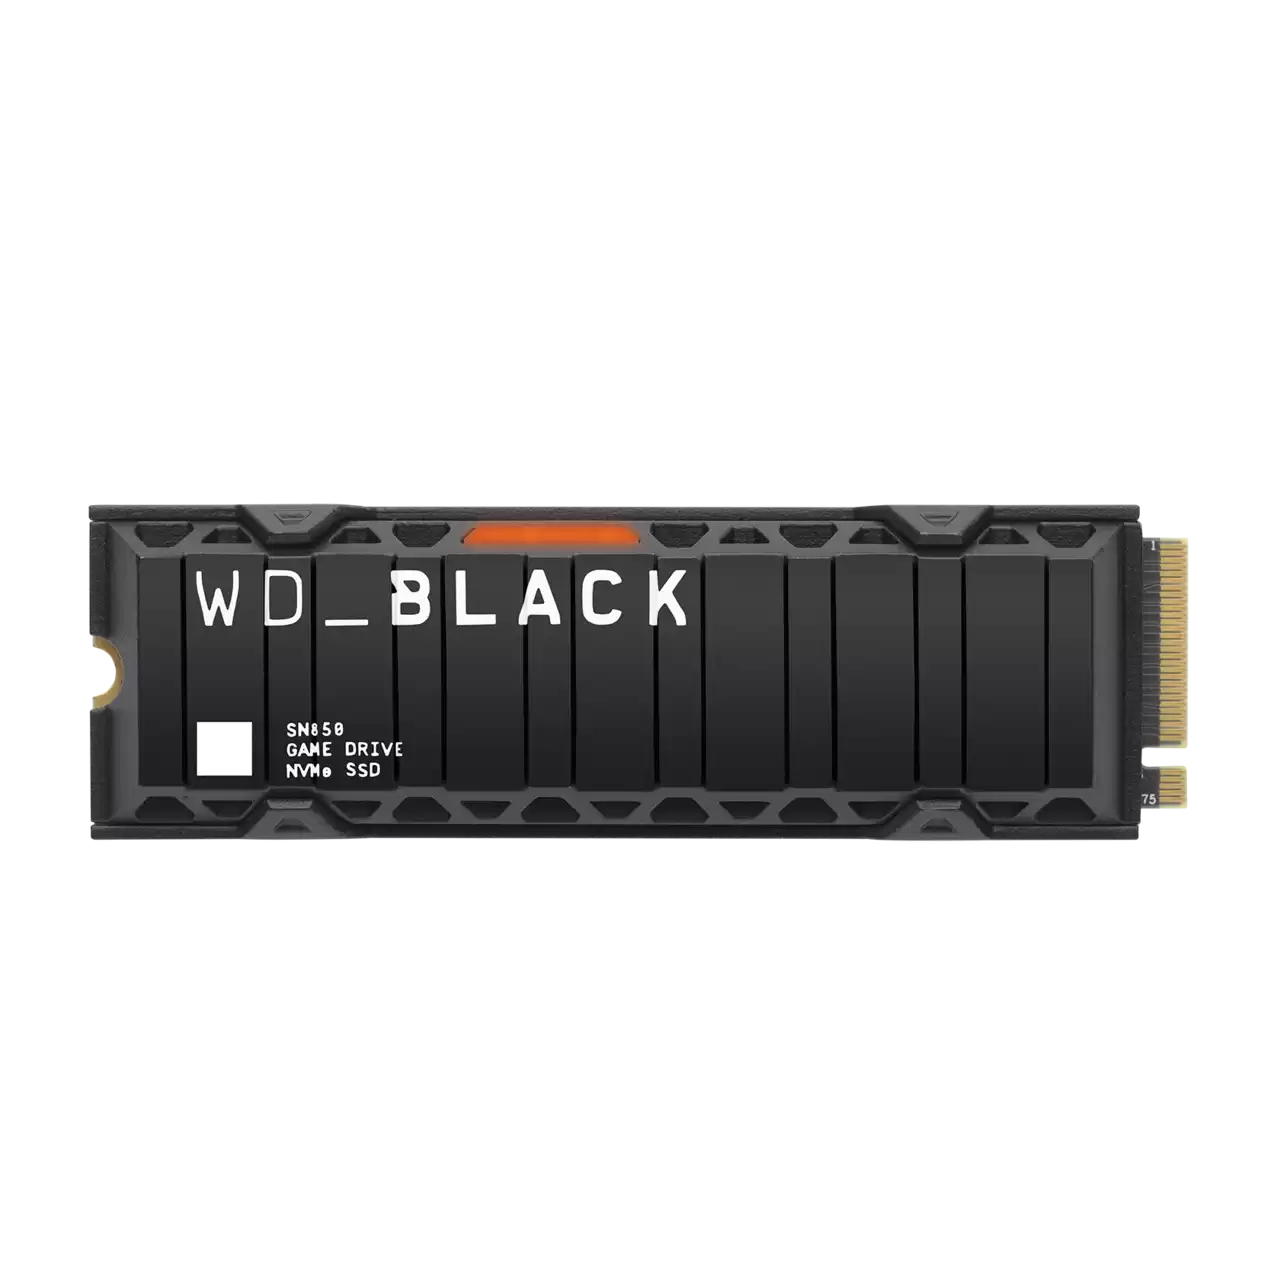 WD_BLACK 2TB SN850 NVMe SSD, Internal M.2 2280 Solid State Drive with Heatsink - WDS200T1XHE - image 1 of 3